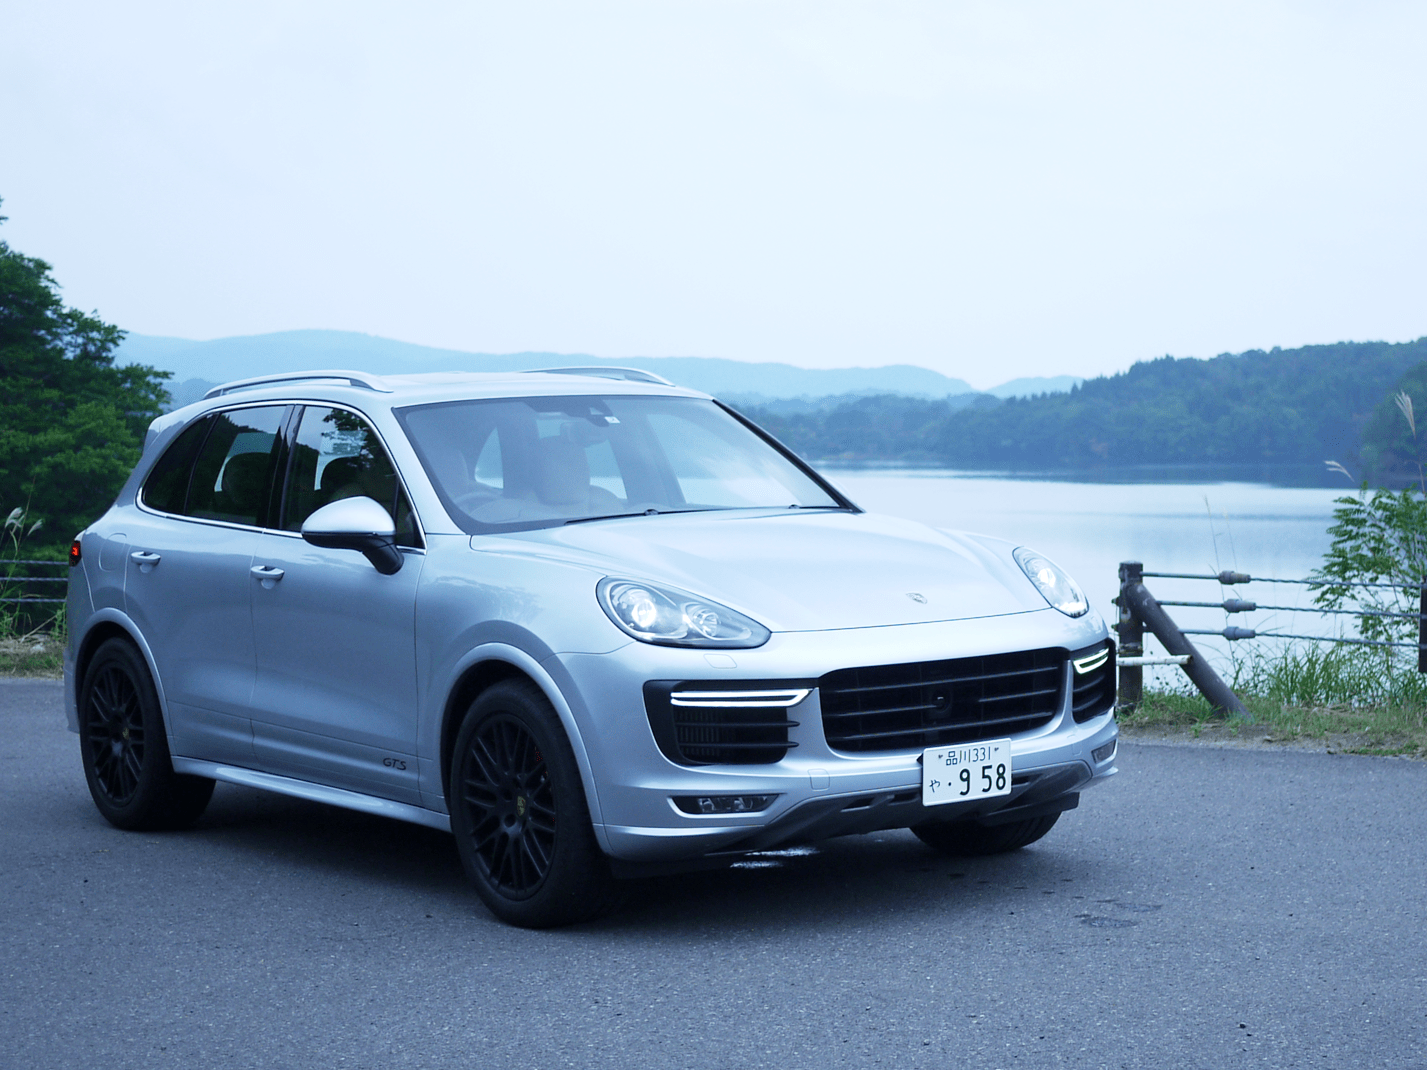 What It’s Like to Drive a Porsche SUV Around Fukushima’s Countryside